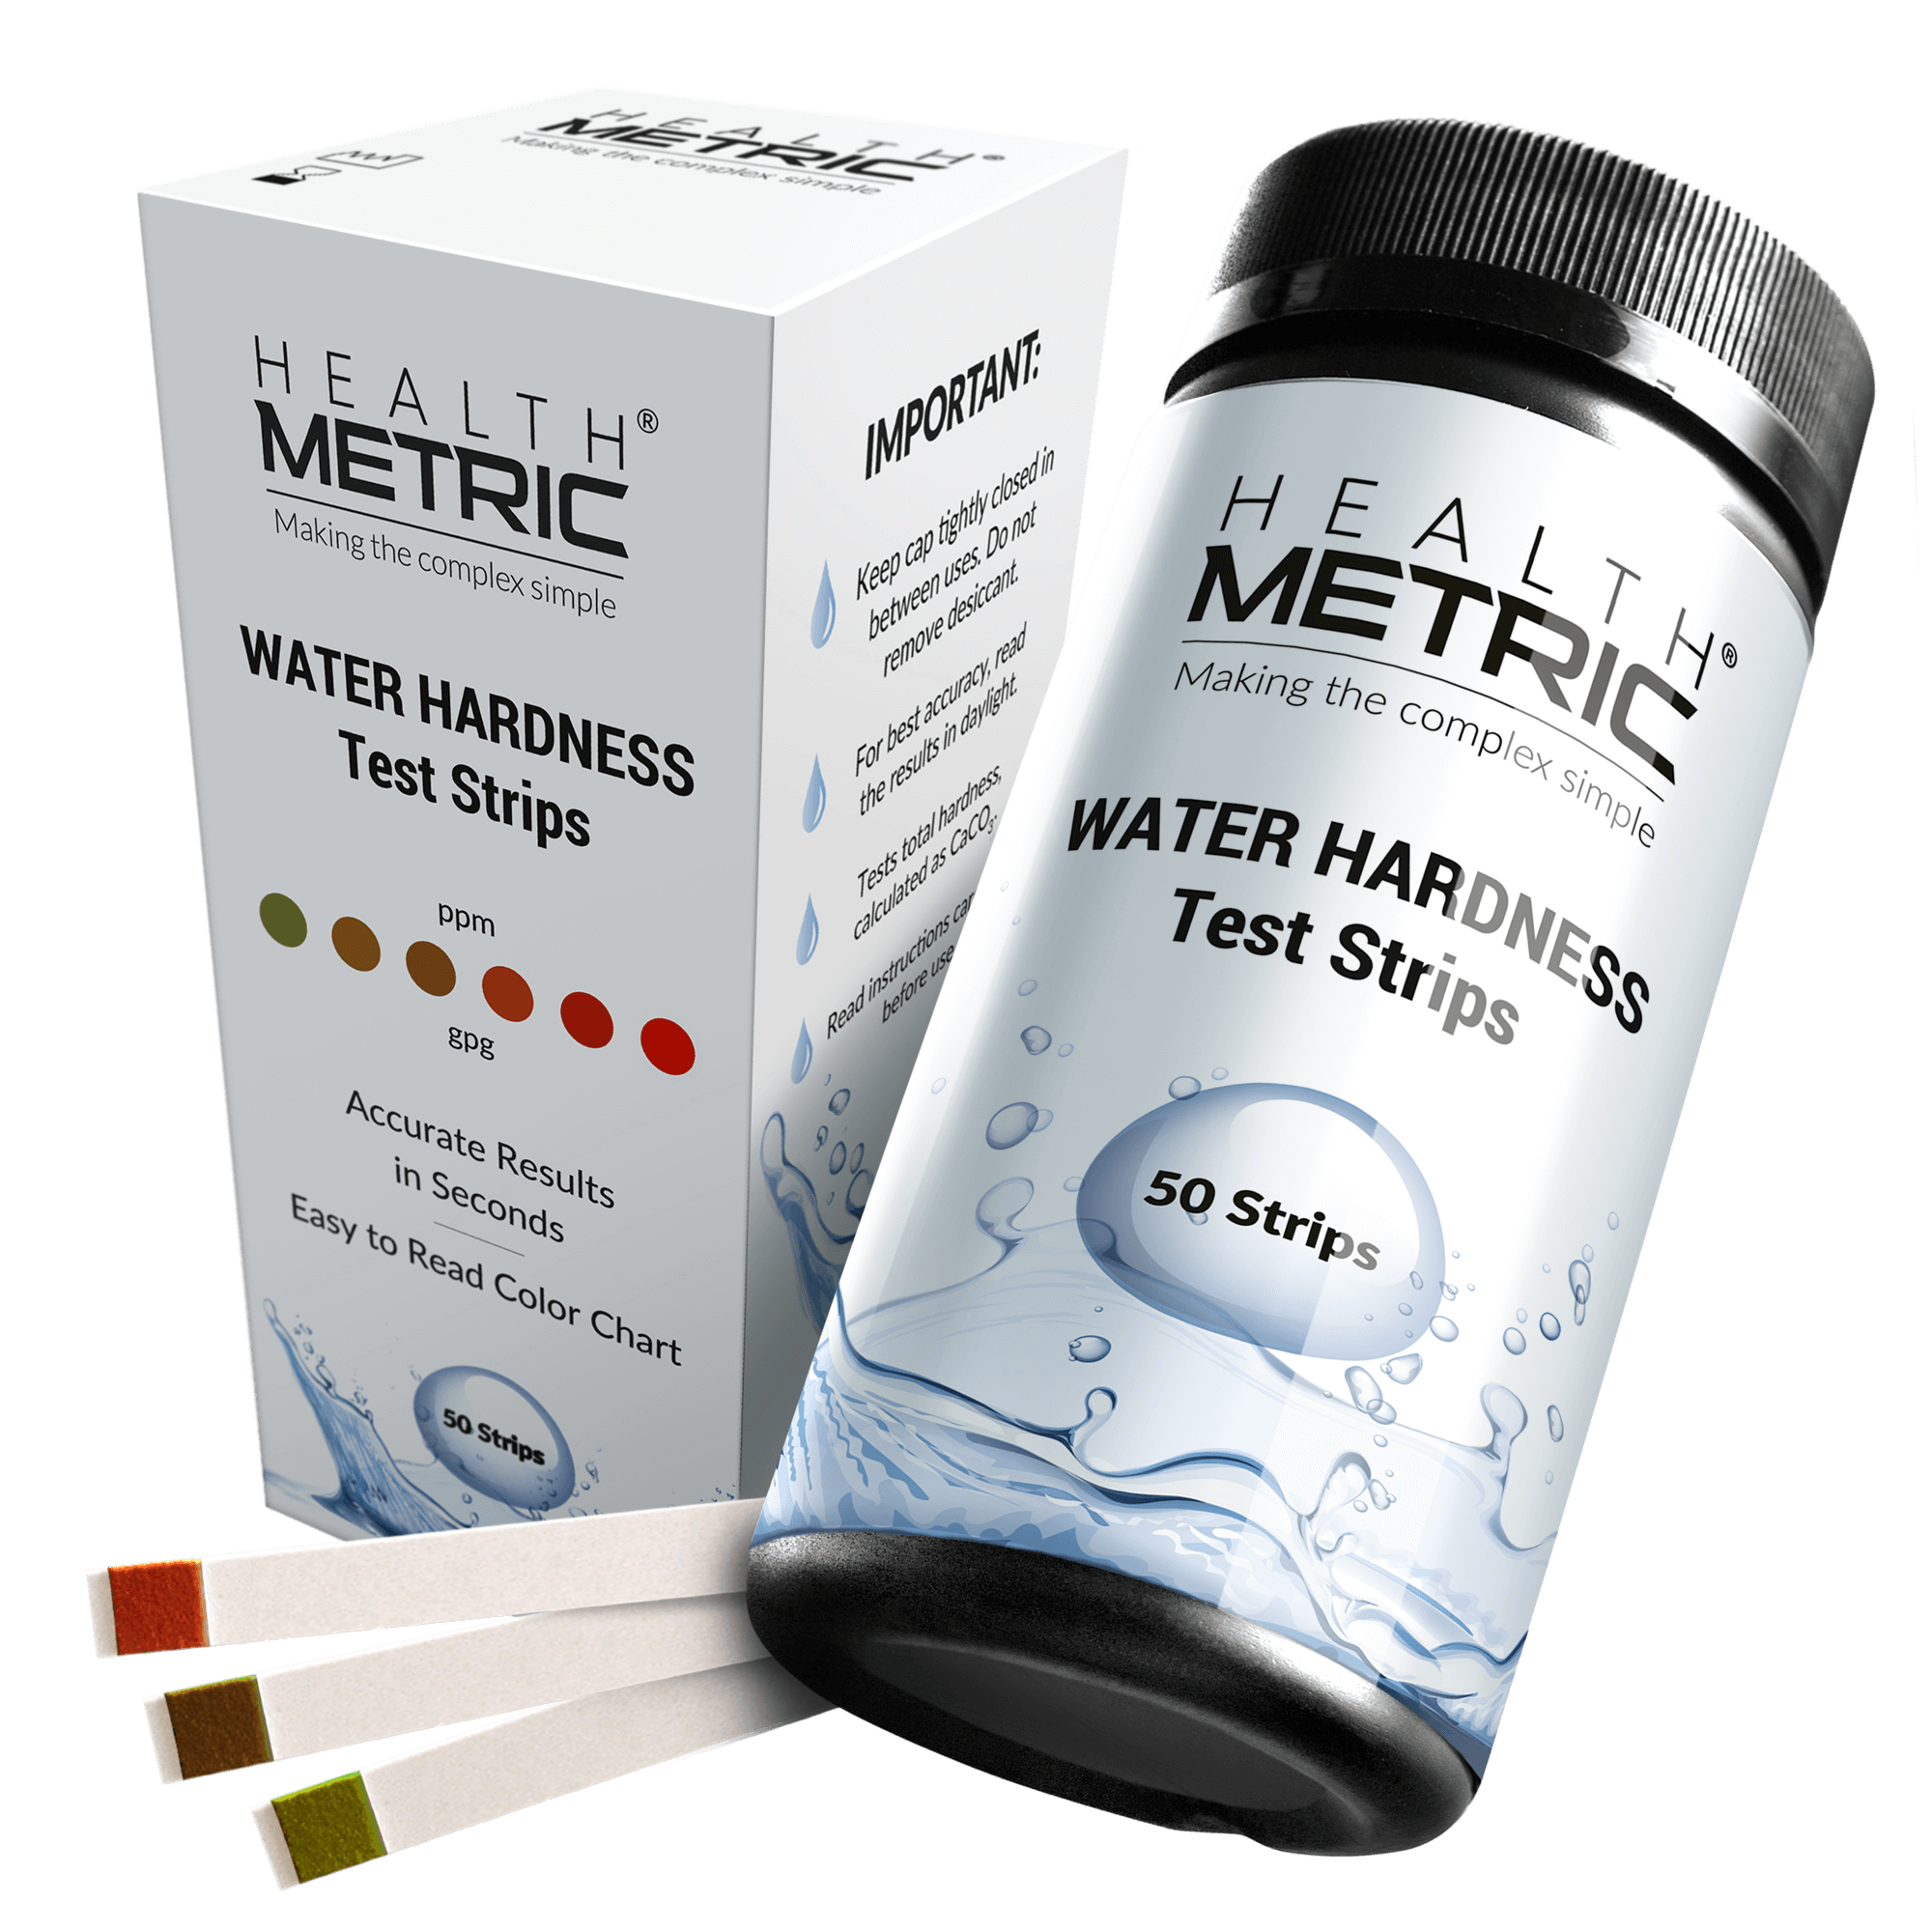 Water Hardness Test Strips - 50 strips at 0-425 ppm